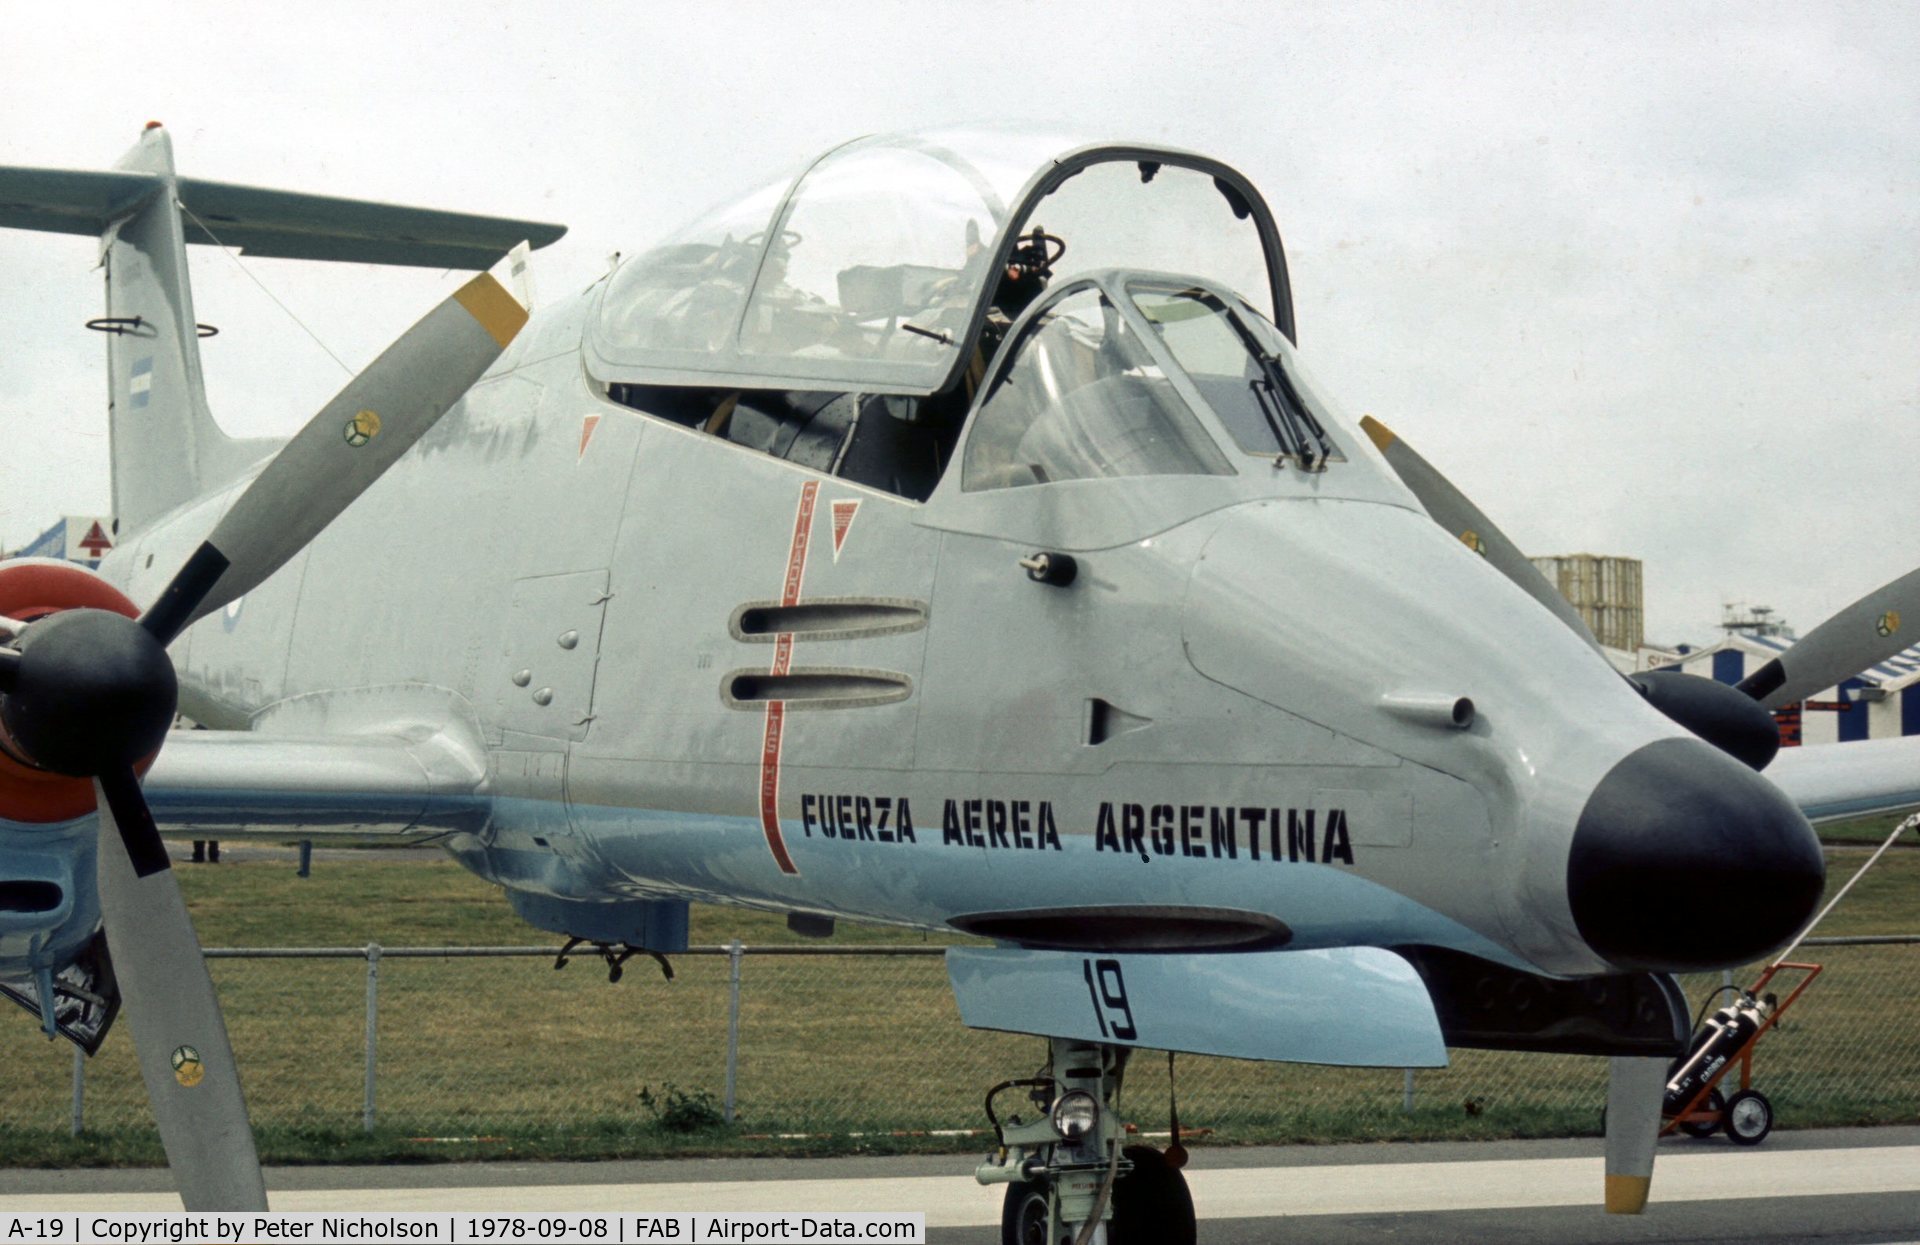 A-19, FMA IA-58A Pucará C/N 019, Another view of the Argentine Air Force Pucara at the 1978 Farnborough Airshow.